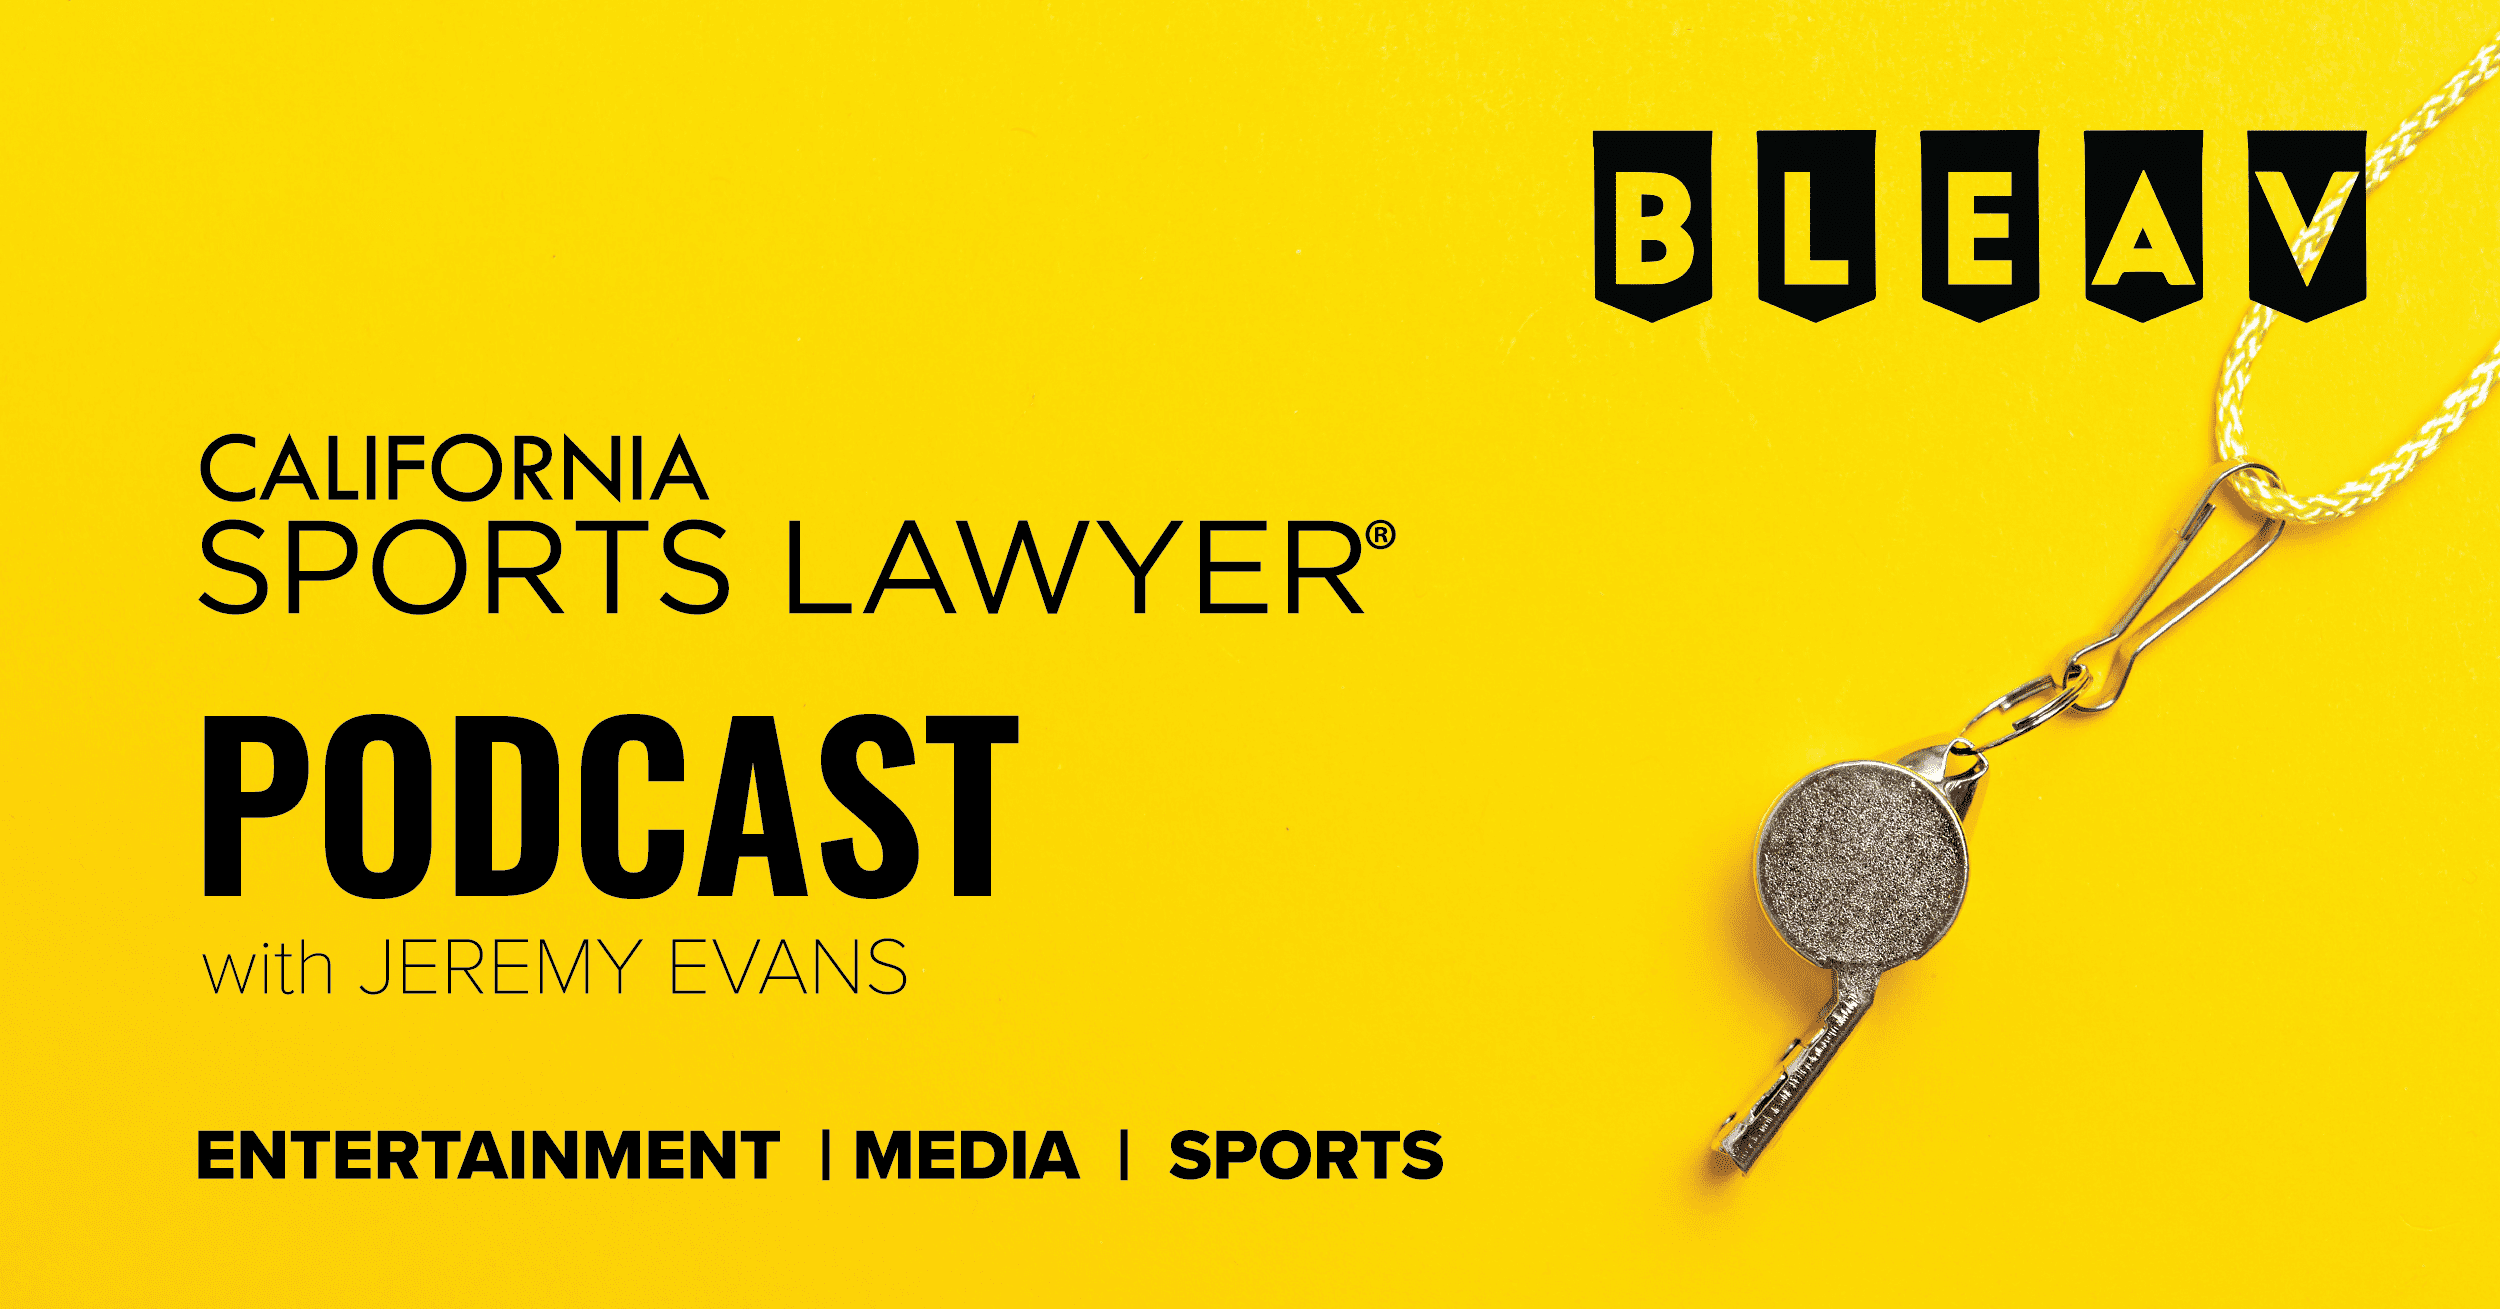 California Sports Lawyer® Podcast with Jeremy Evans: Suspensions and Controversy in Sports